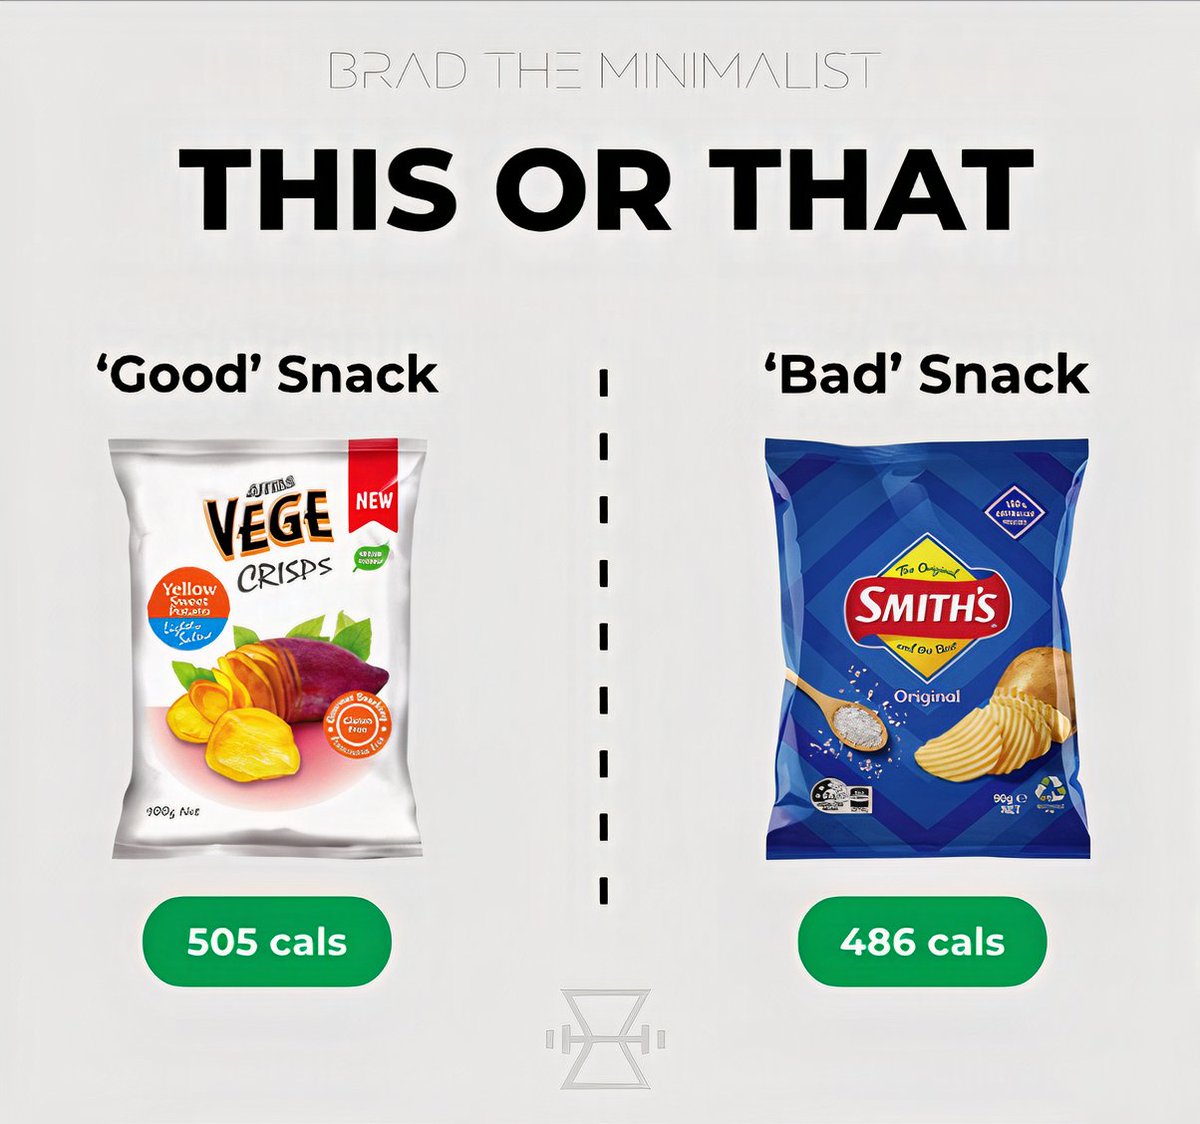 THIS OR THAT?

'Healthy' Vege Crisps: 505 calories

'Unhealthy' Potato Crisps: 486 calories